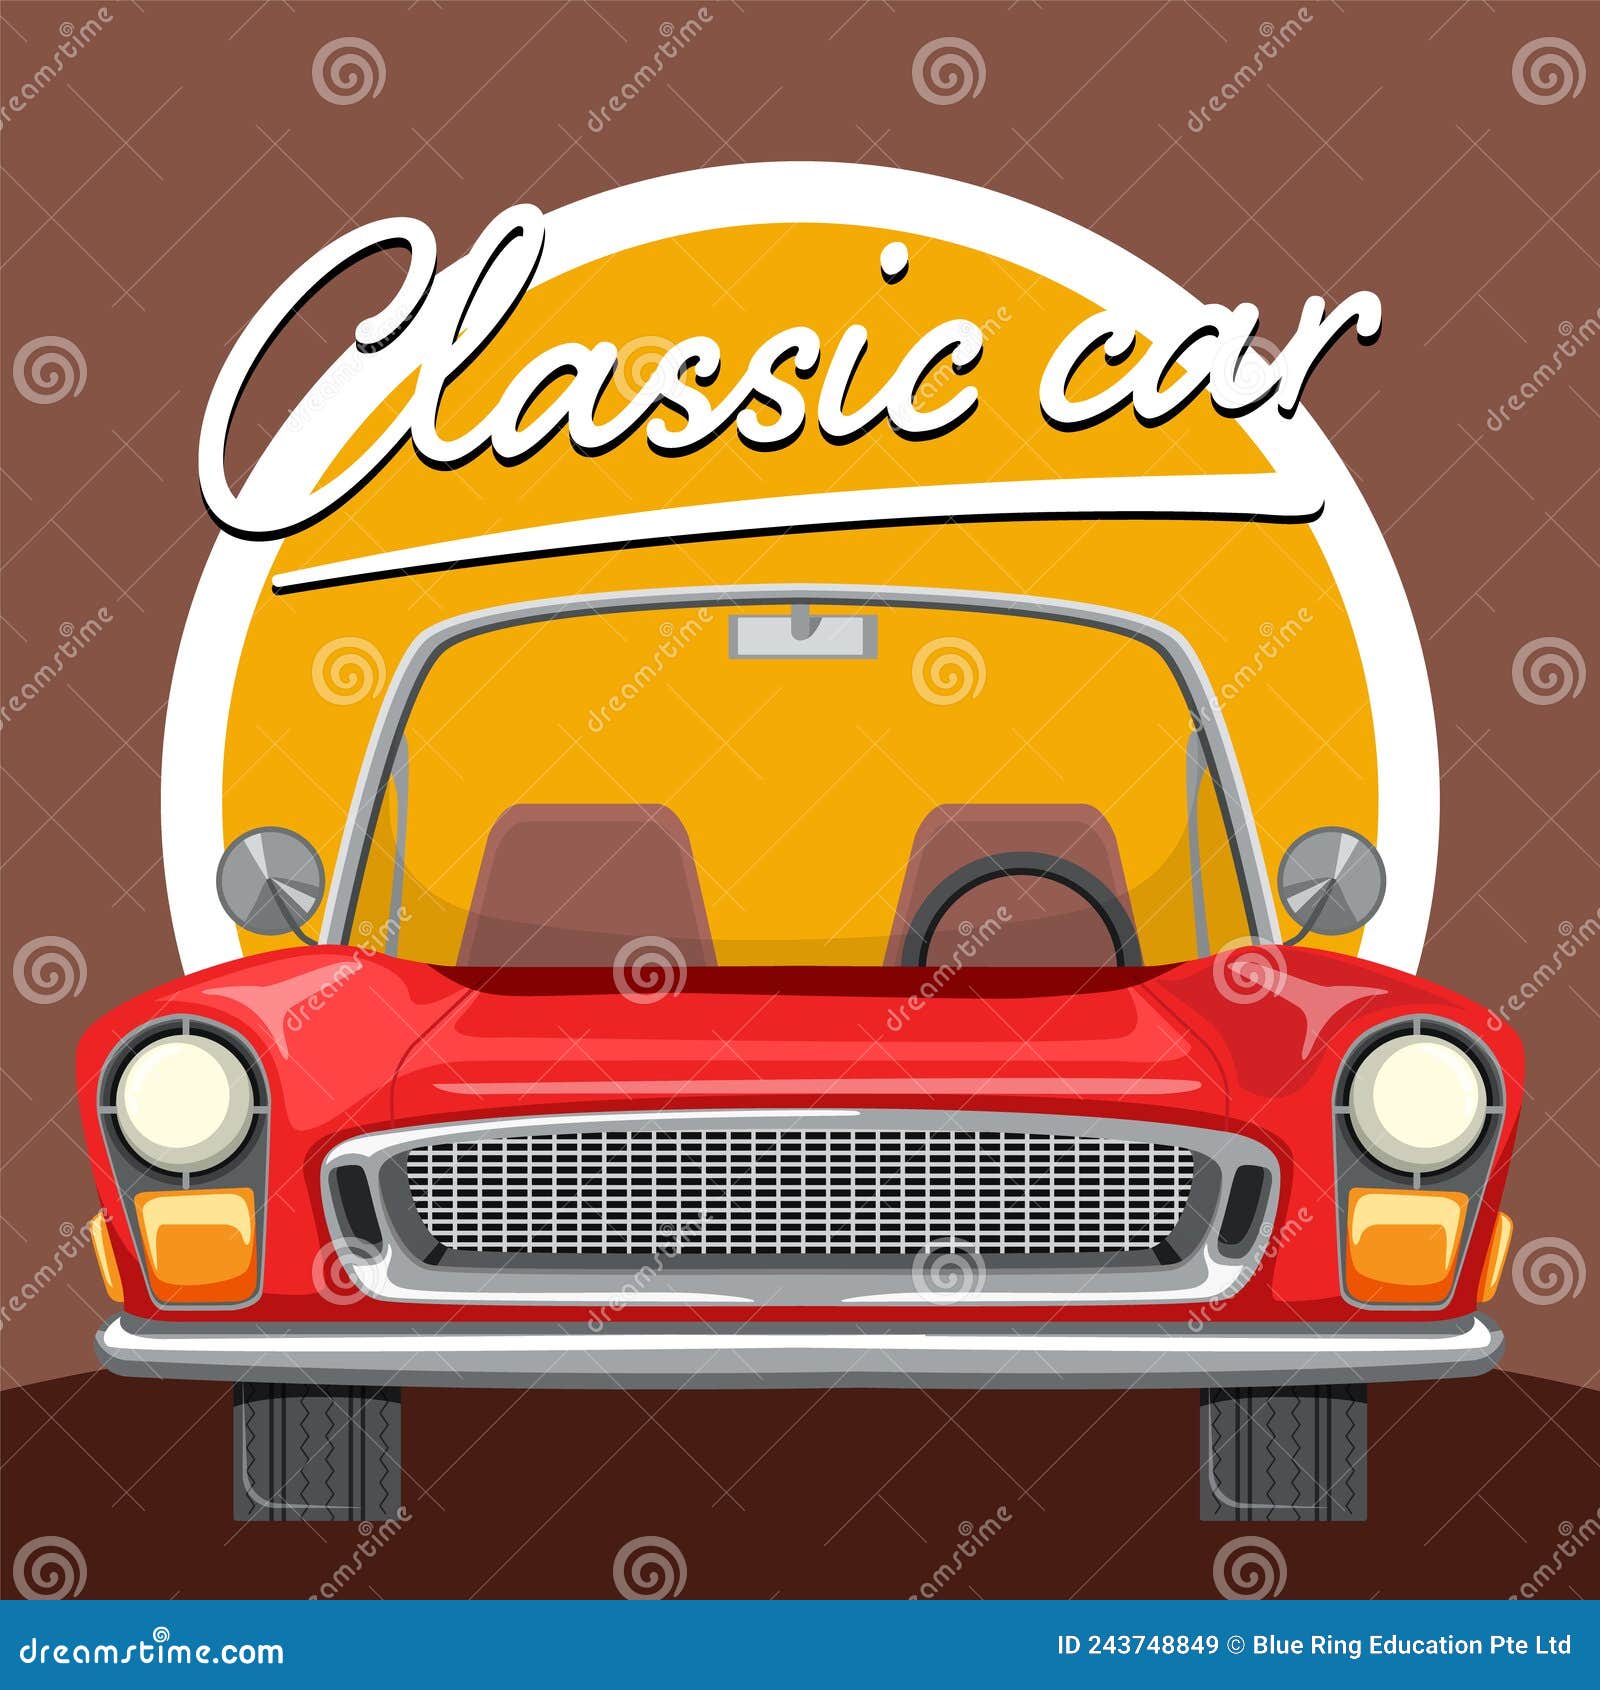 The Classic Car Concept with Old Car Front View Stock Vector ...